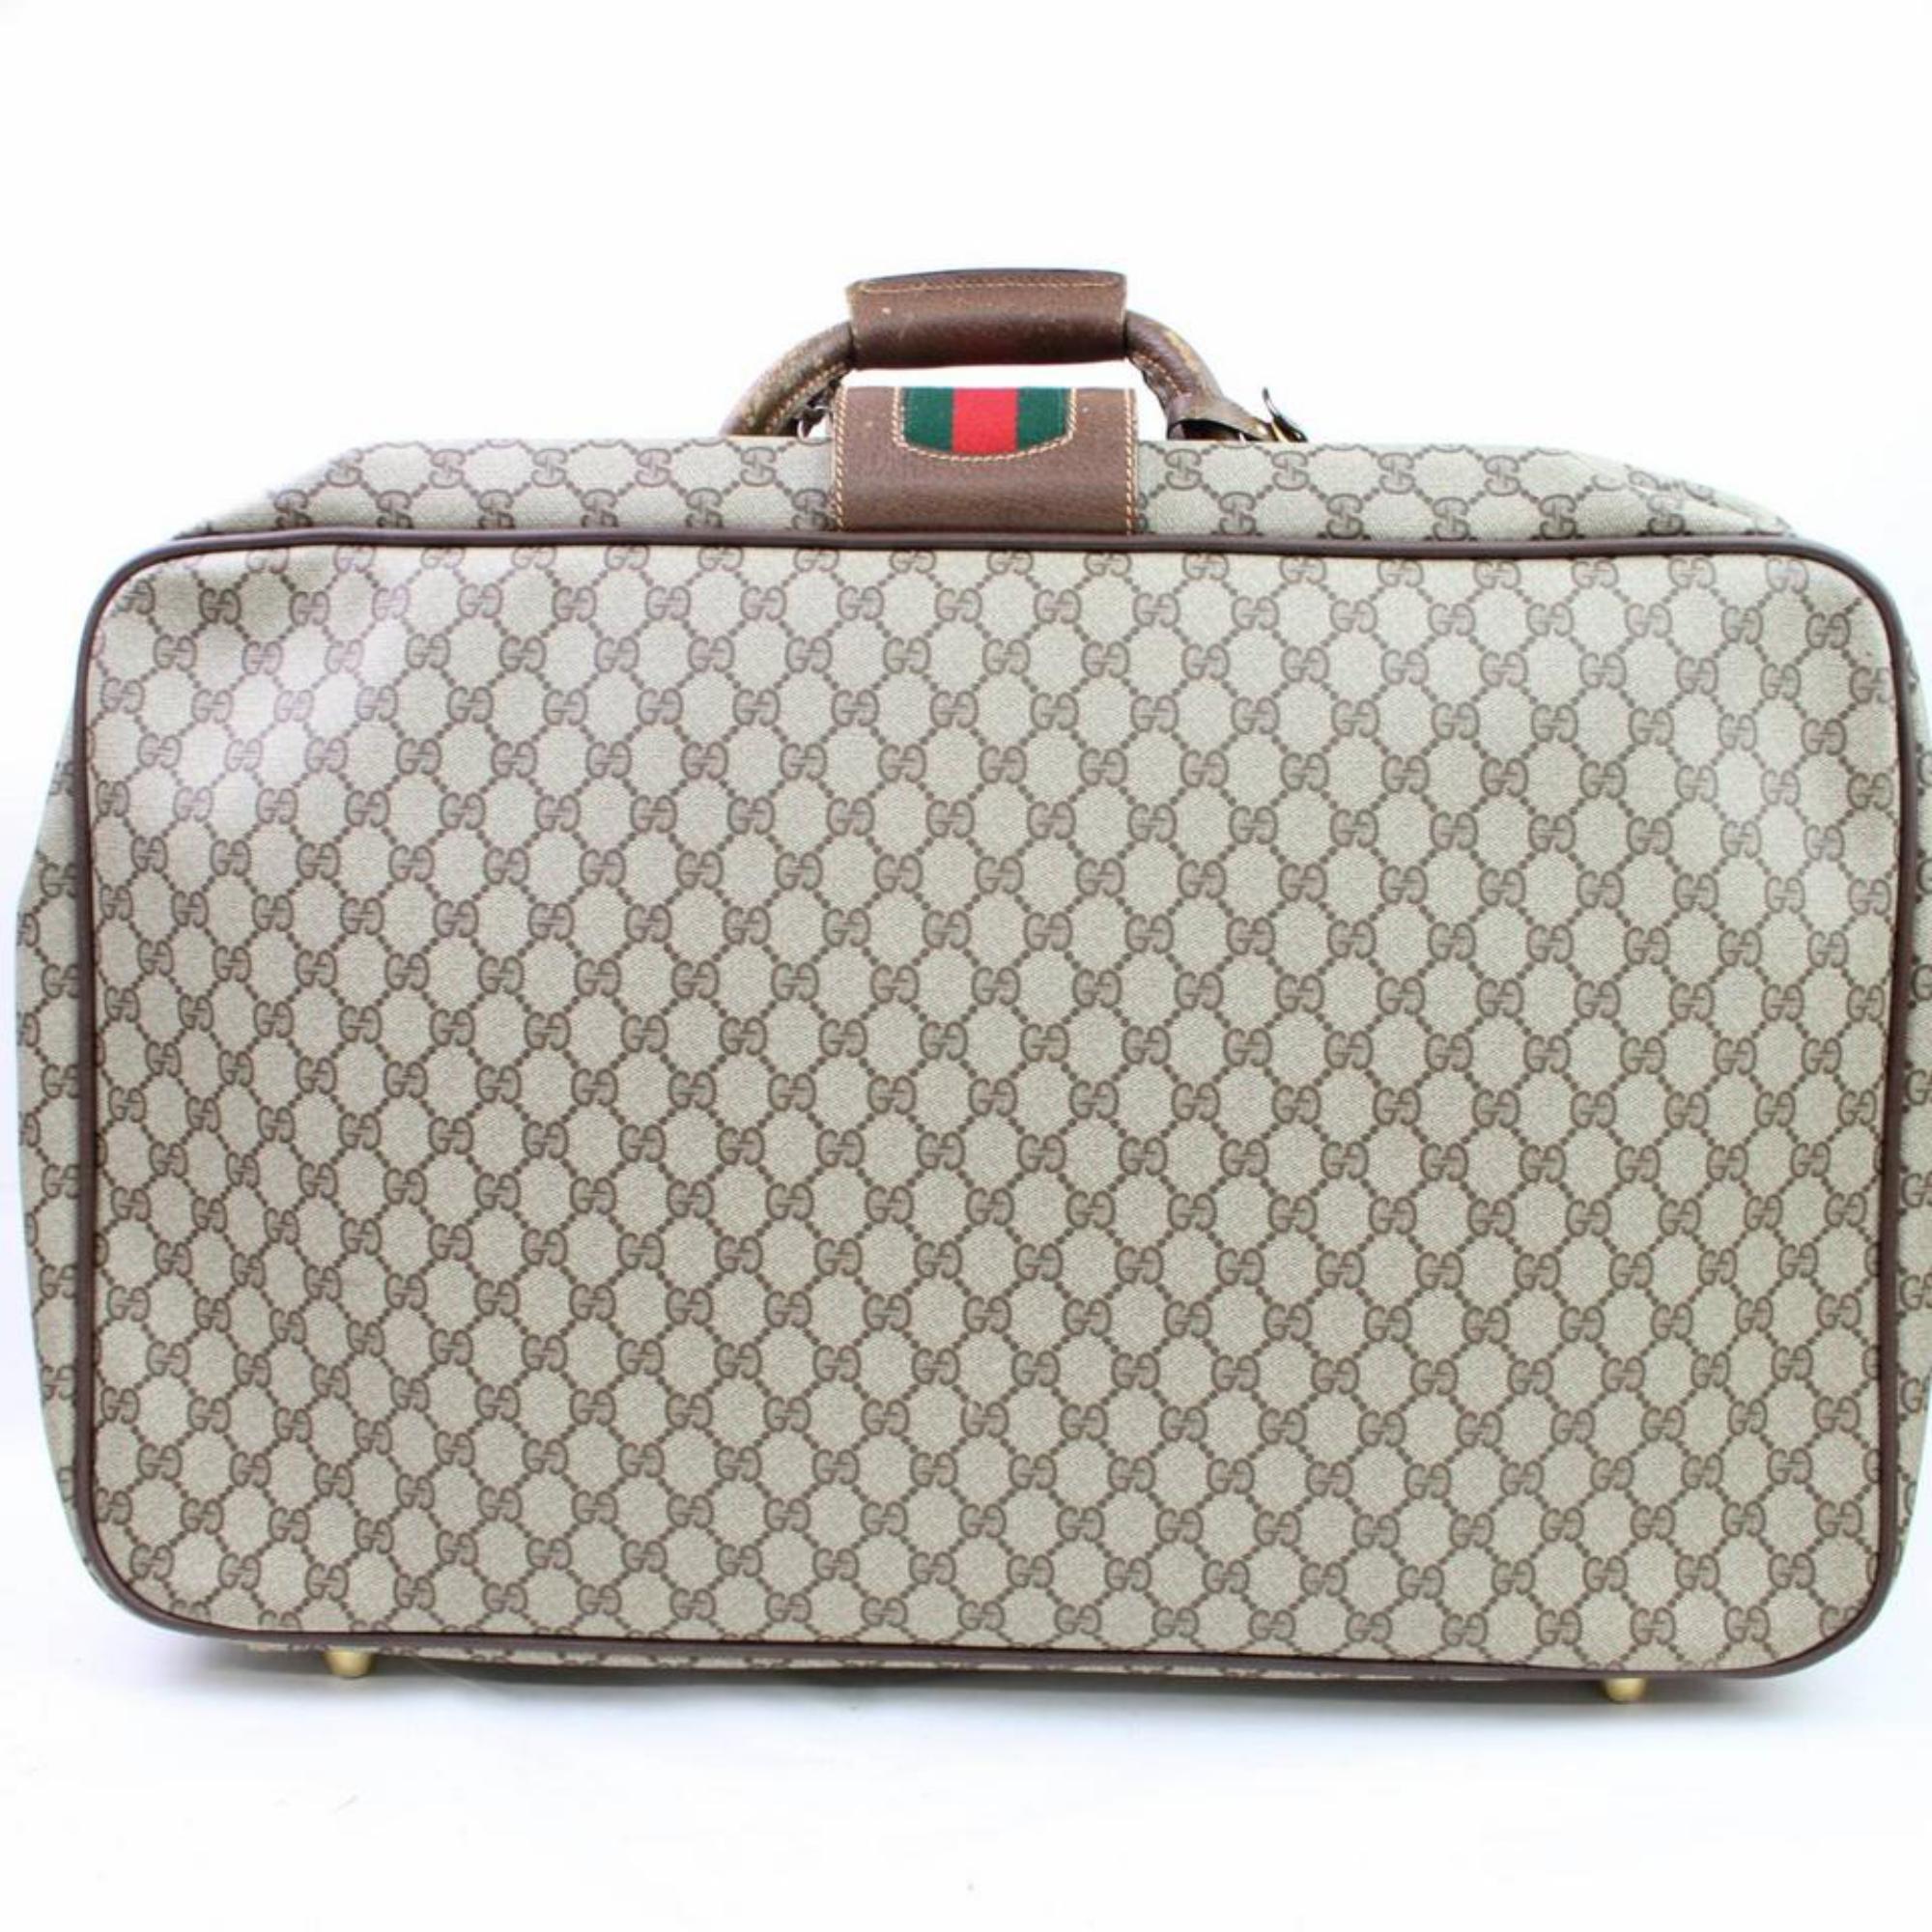 Gucci Sherry Web Supreme Suitcase 866636 Beige Coated Canvas Weekend/Travel Bag For Sale 2